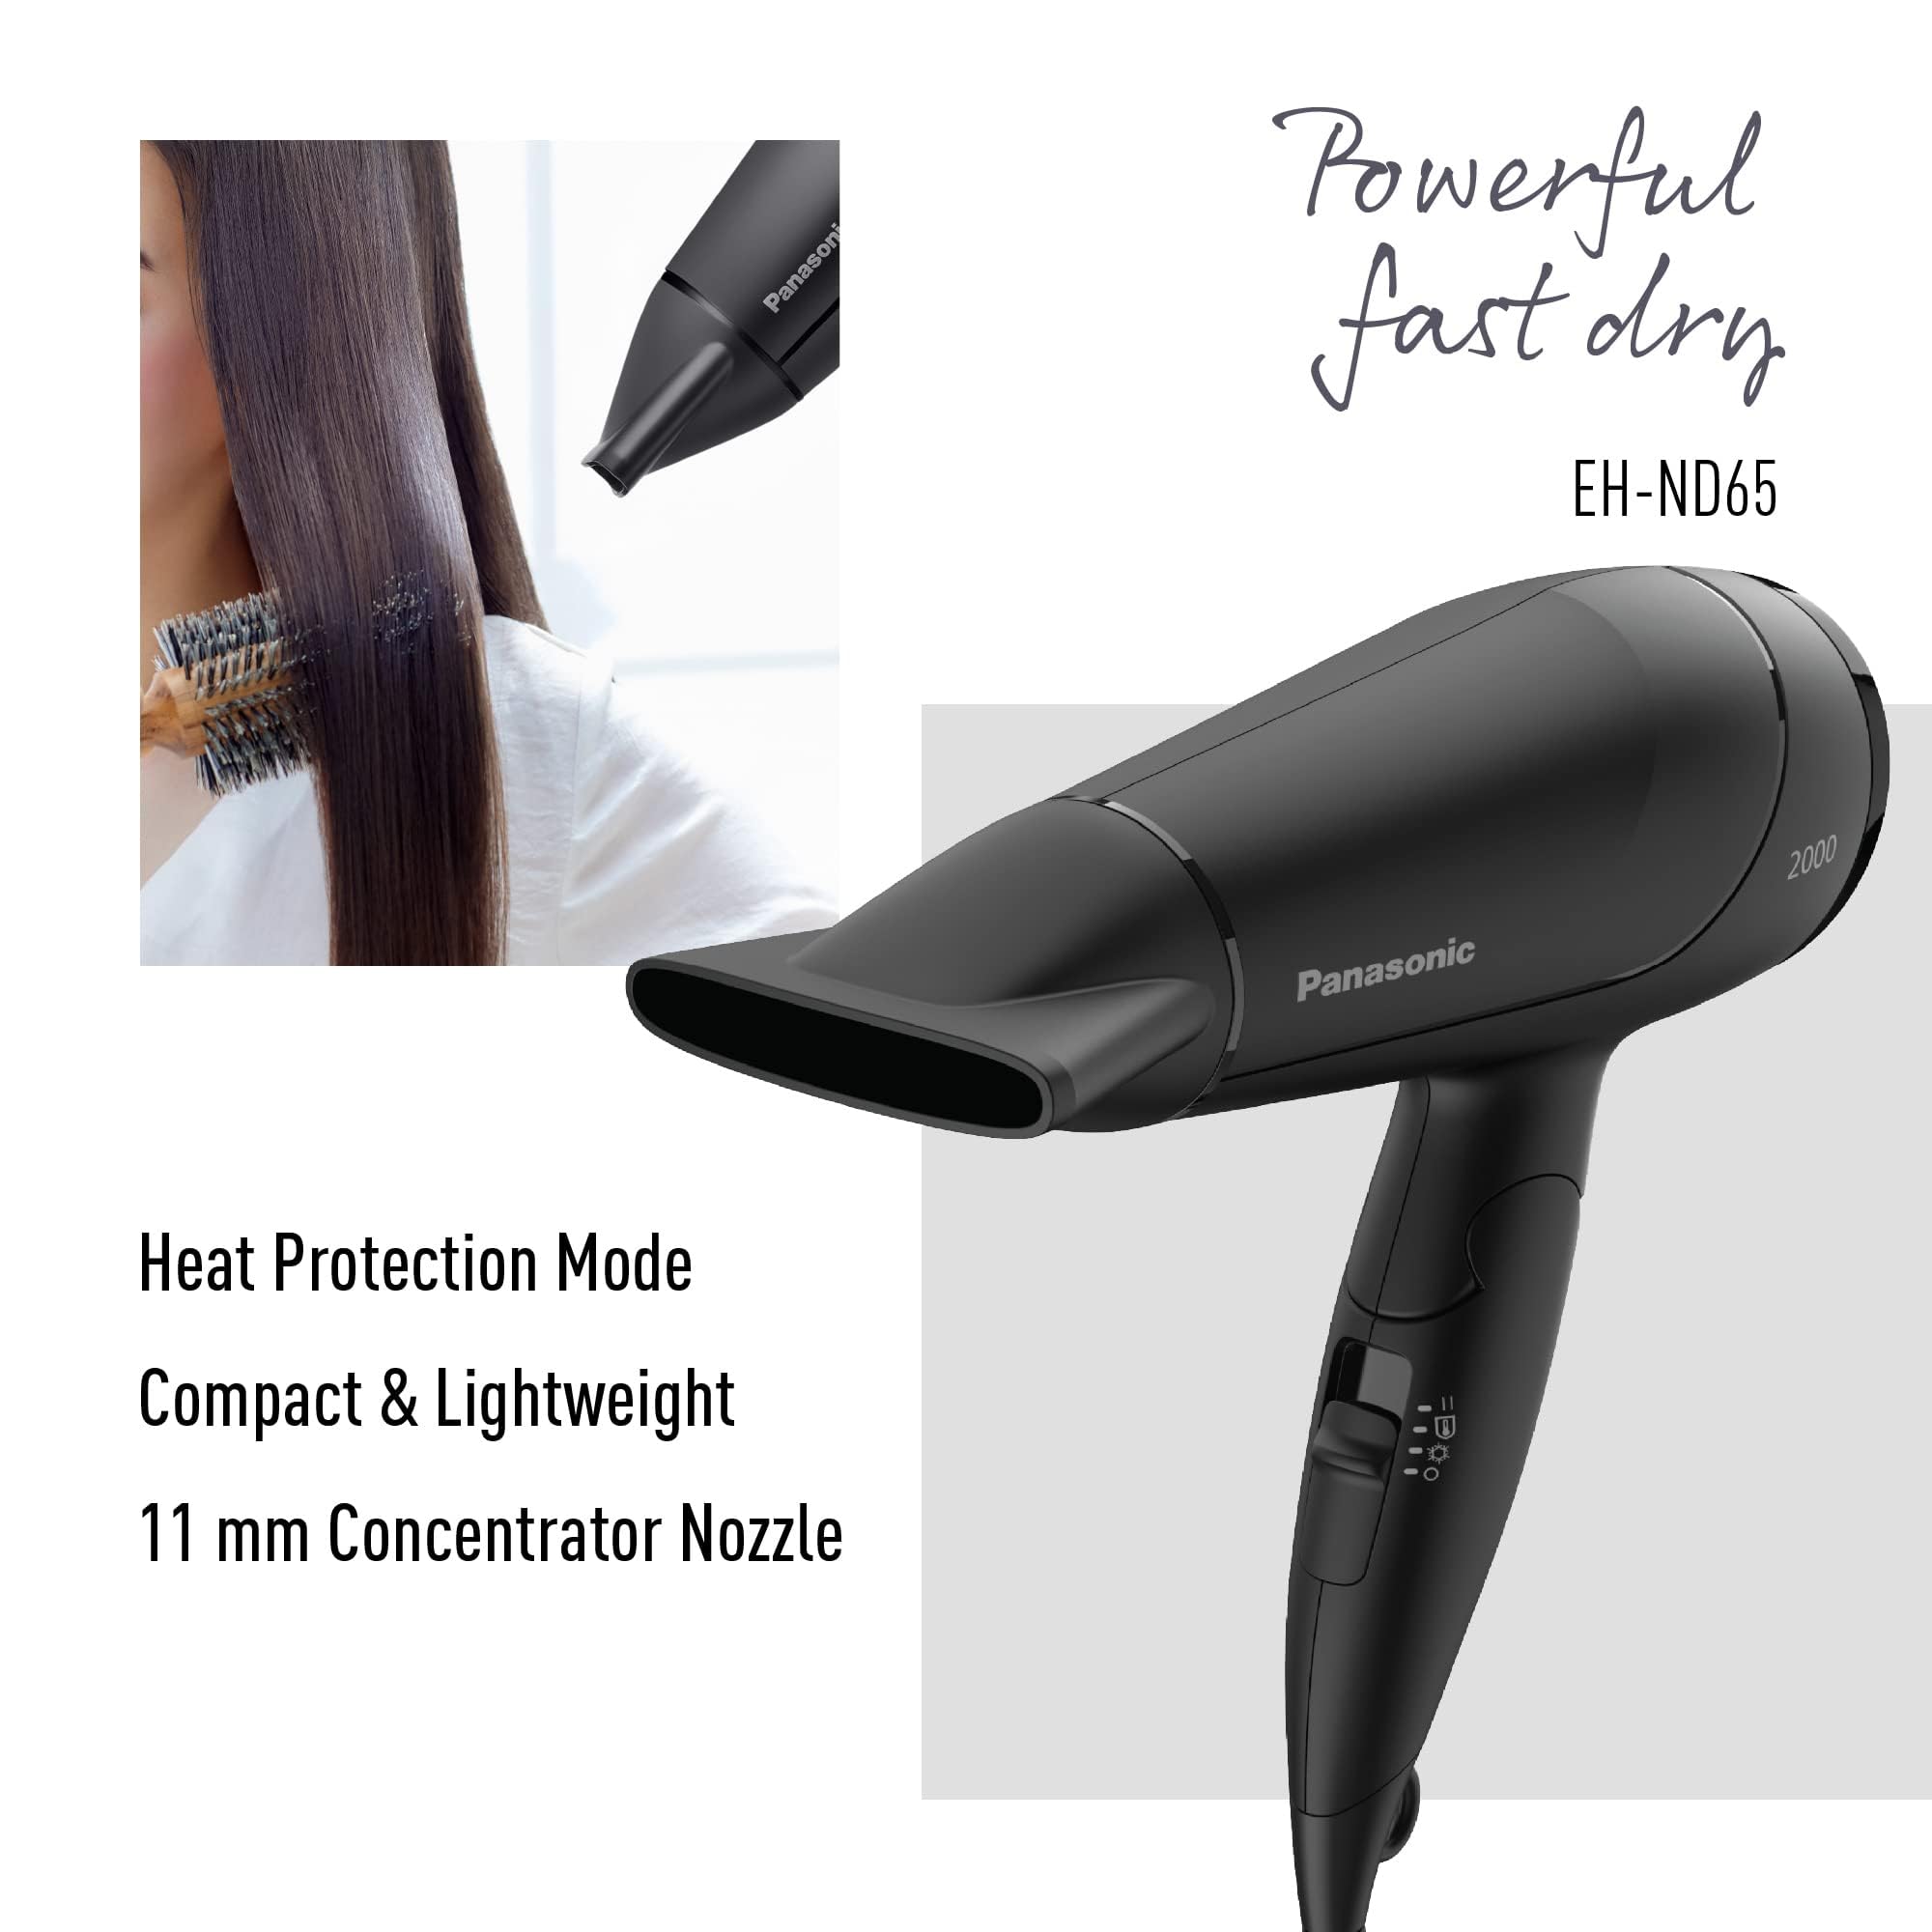 Panasonic 2000W Compact Powerful Hair Dryer with 11mm concentrator nozzle for Fast Drying & Smooth Finish (OPEN-BOX)